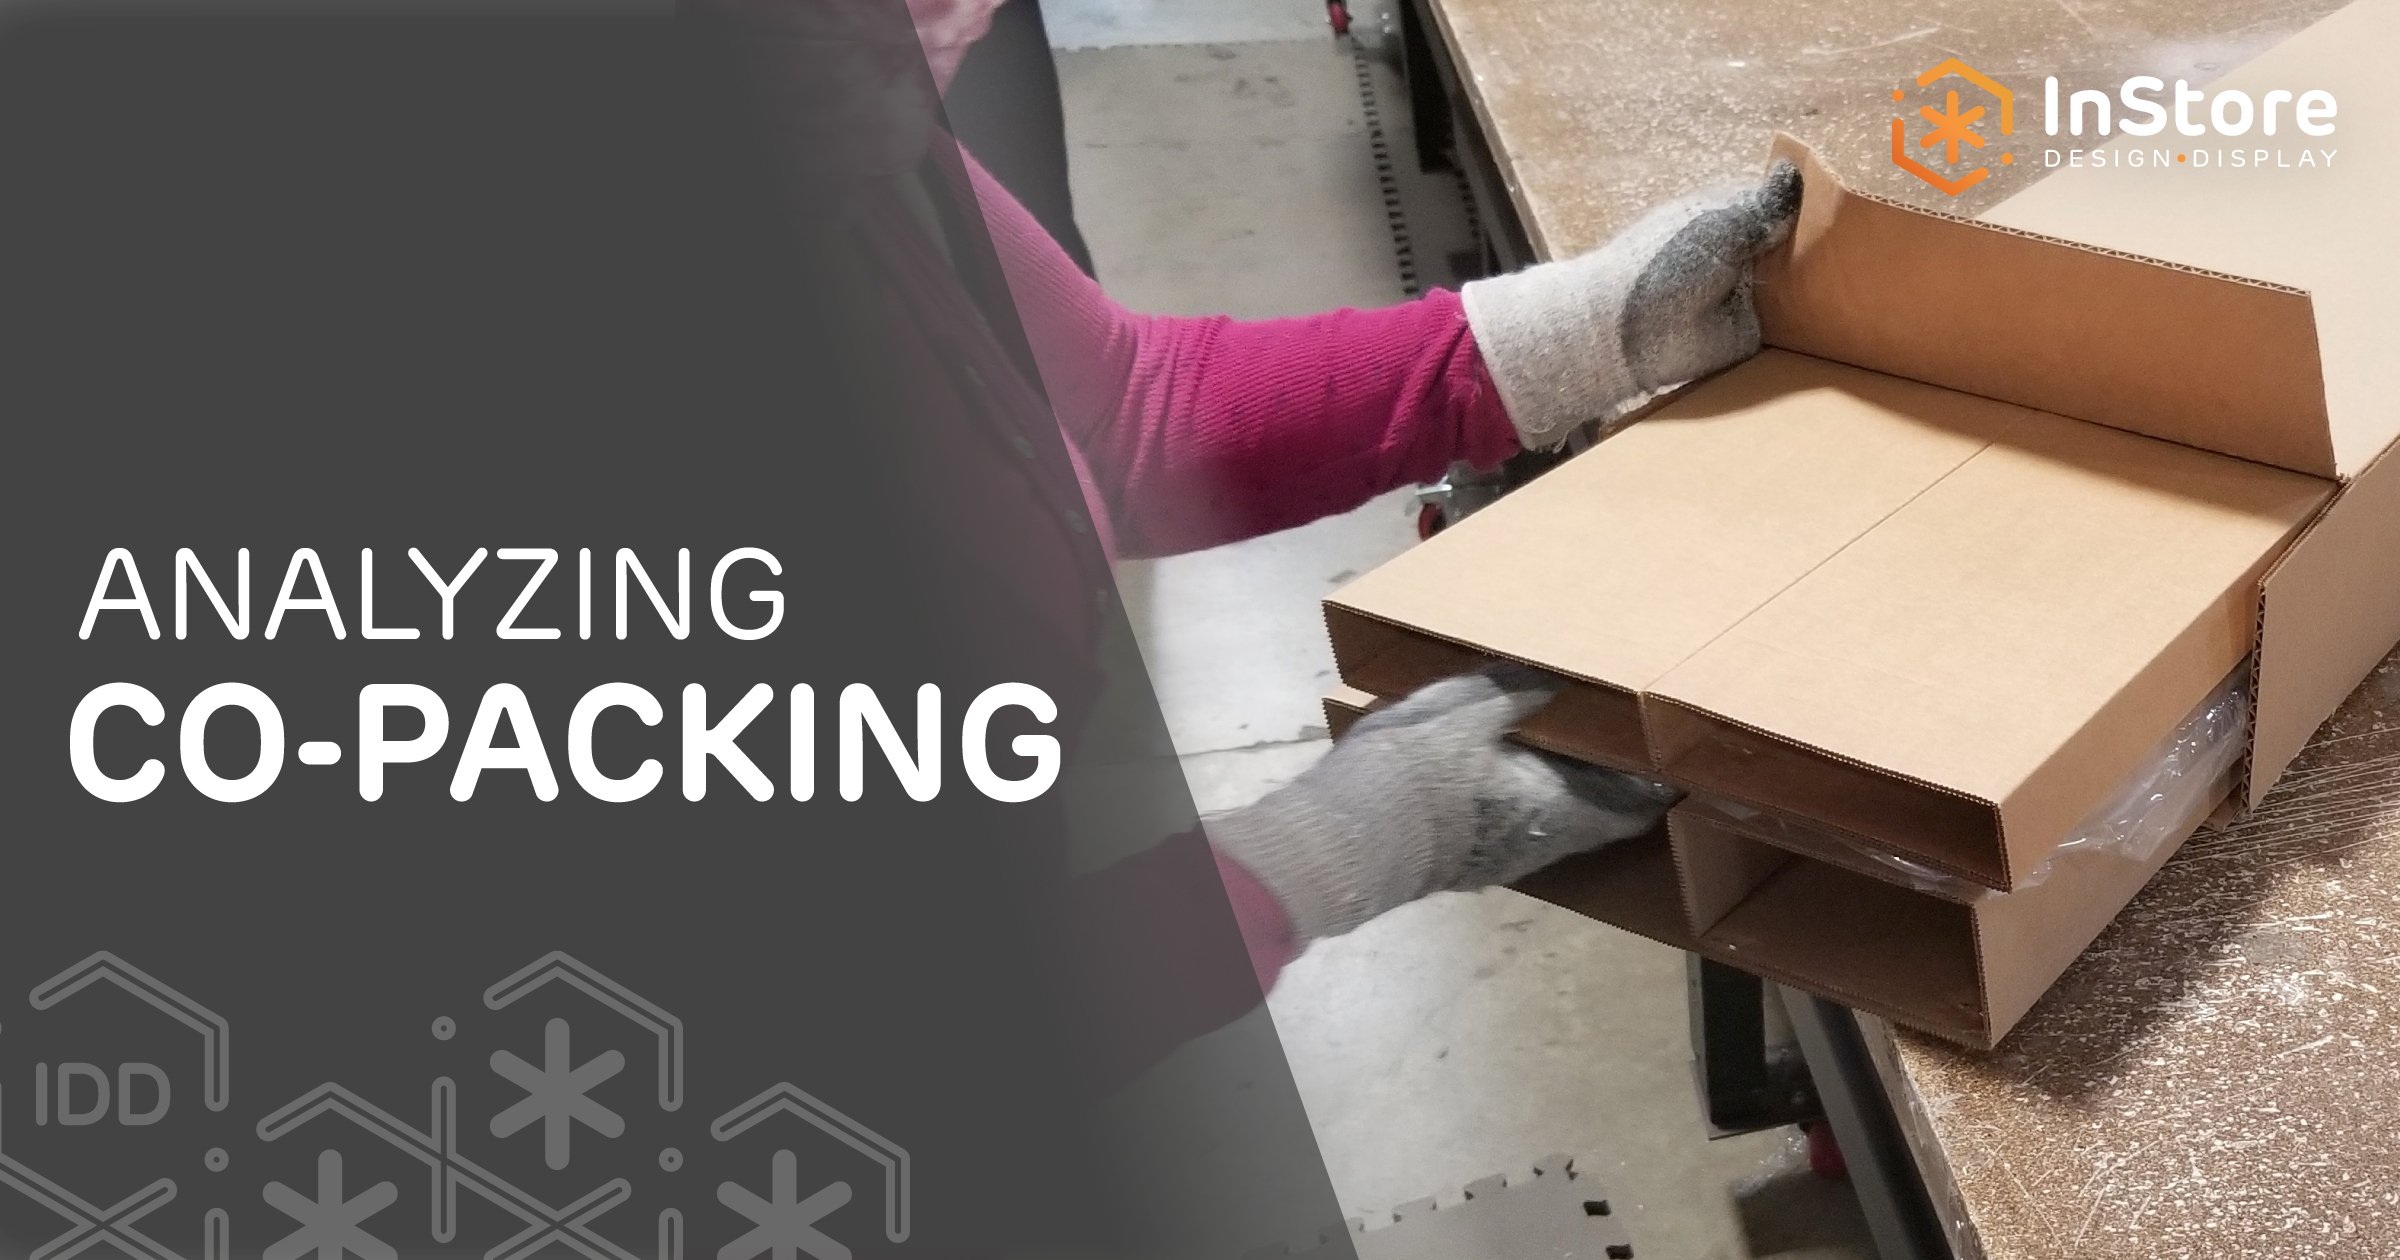 What is Co-Packing?